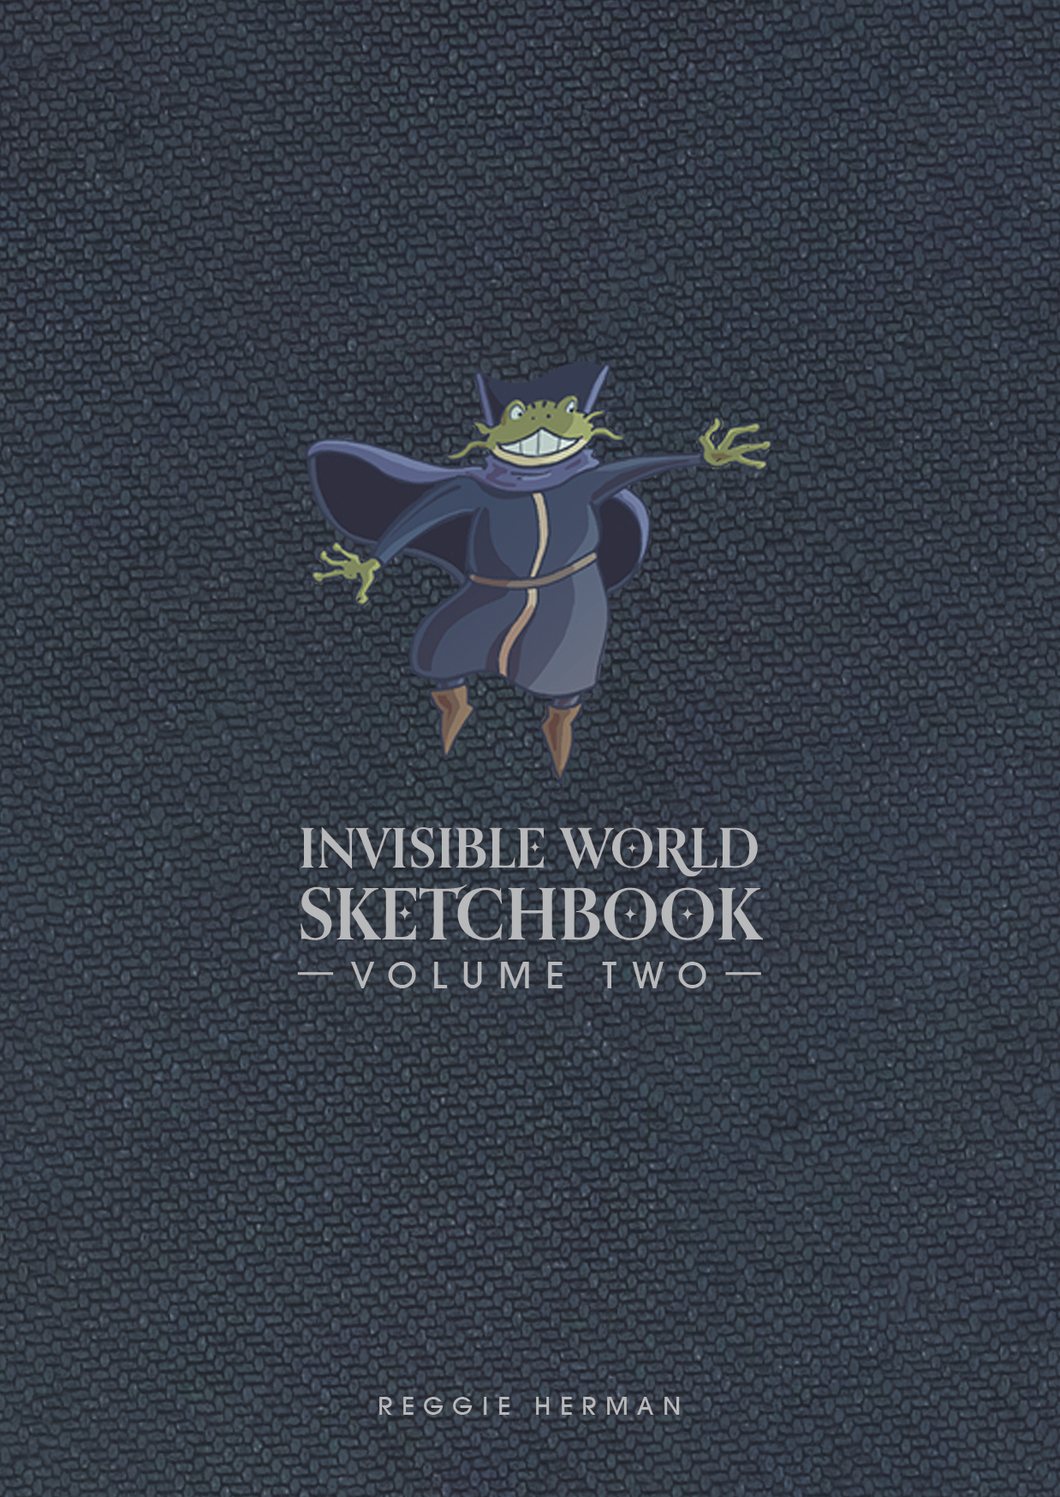 Invisible World Sketchbook - Volume Two